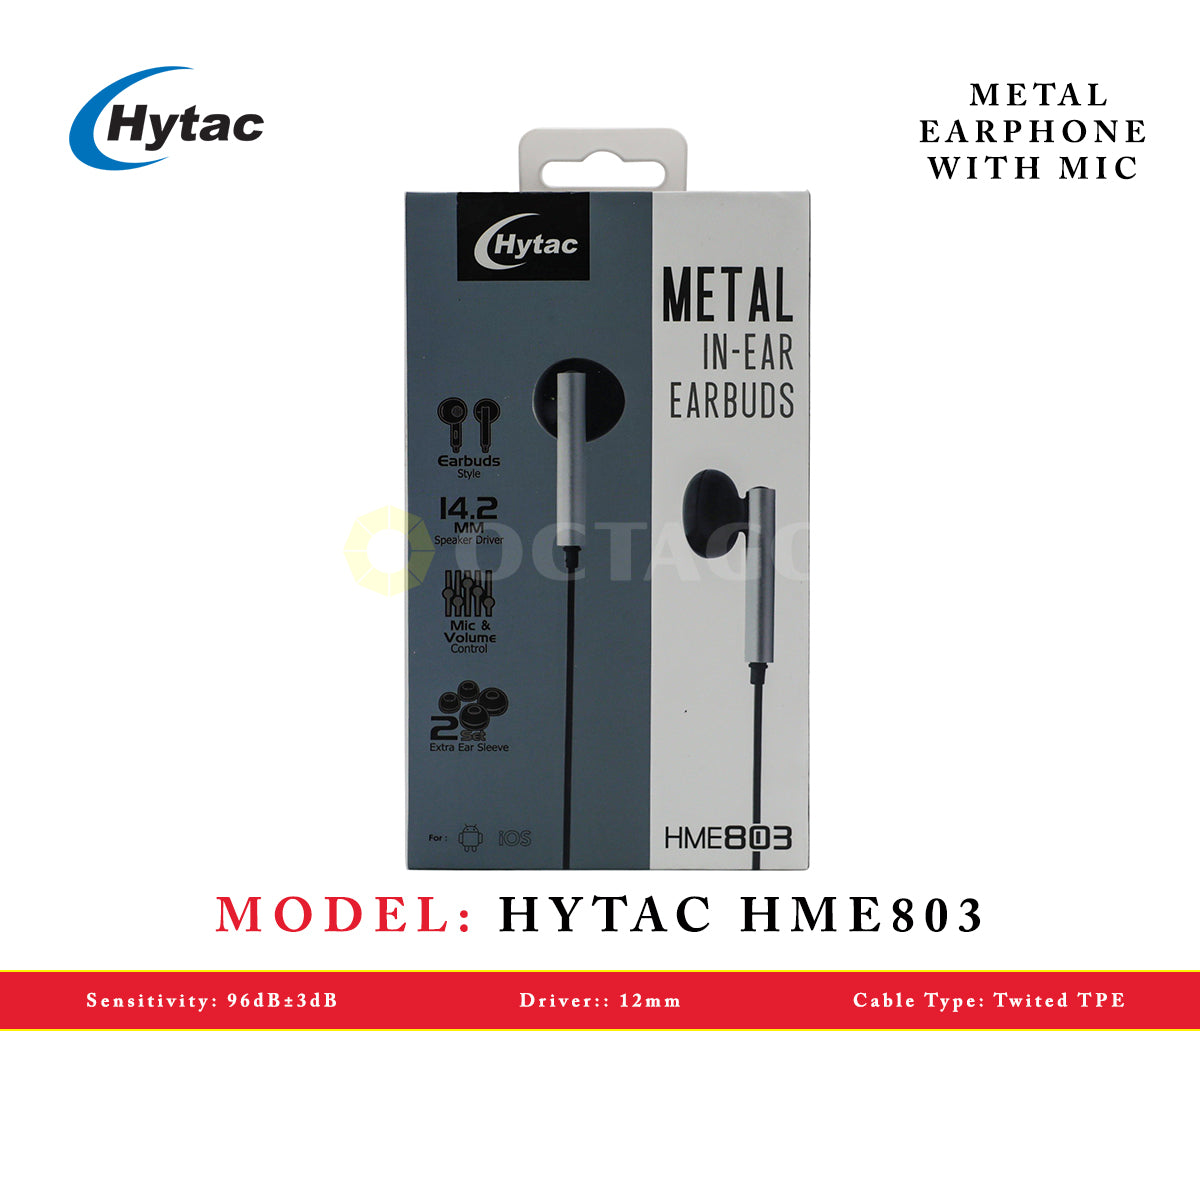 HYTAC HME803 SILVER METAL EARPHONE WITH MIC